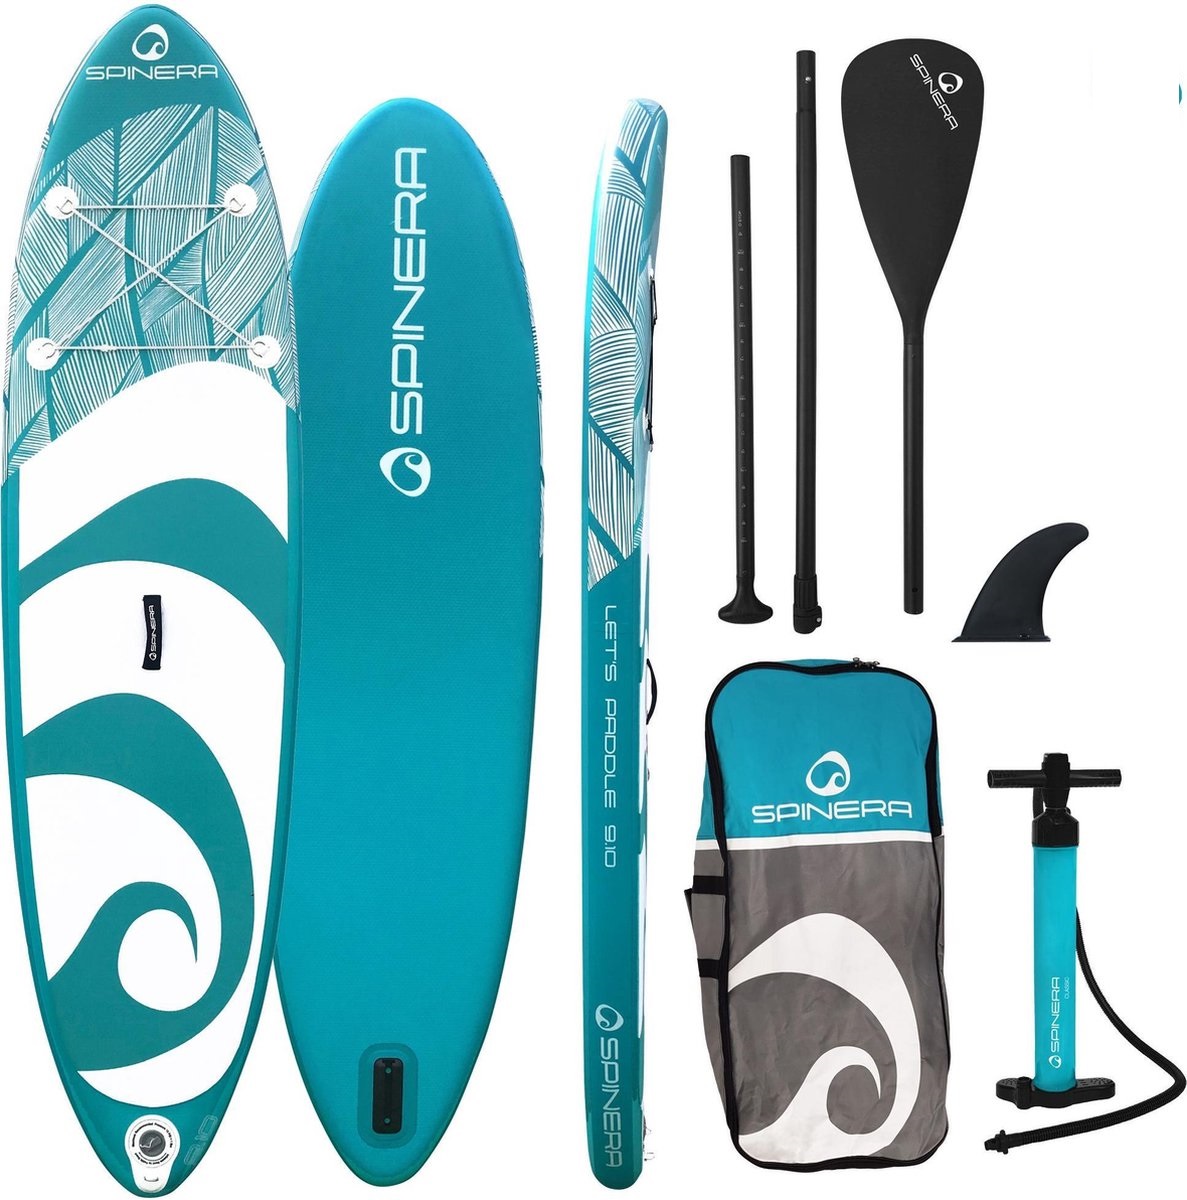  Let's Paddle  9.10 opblaasbare sup